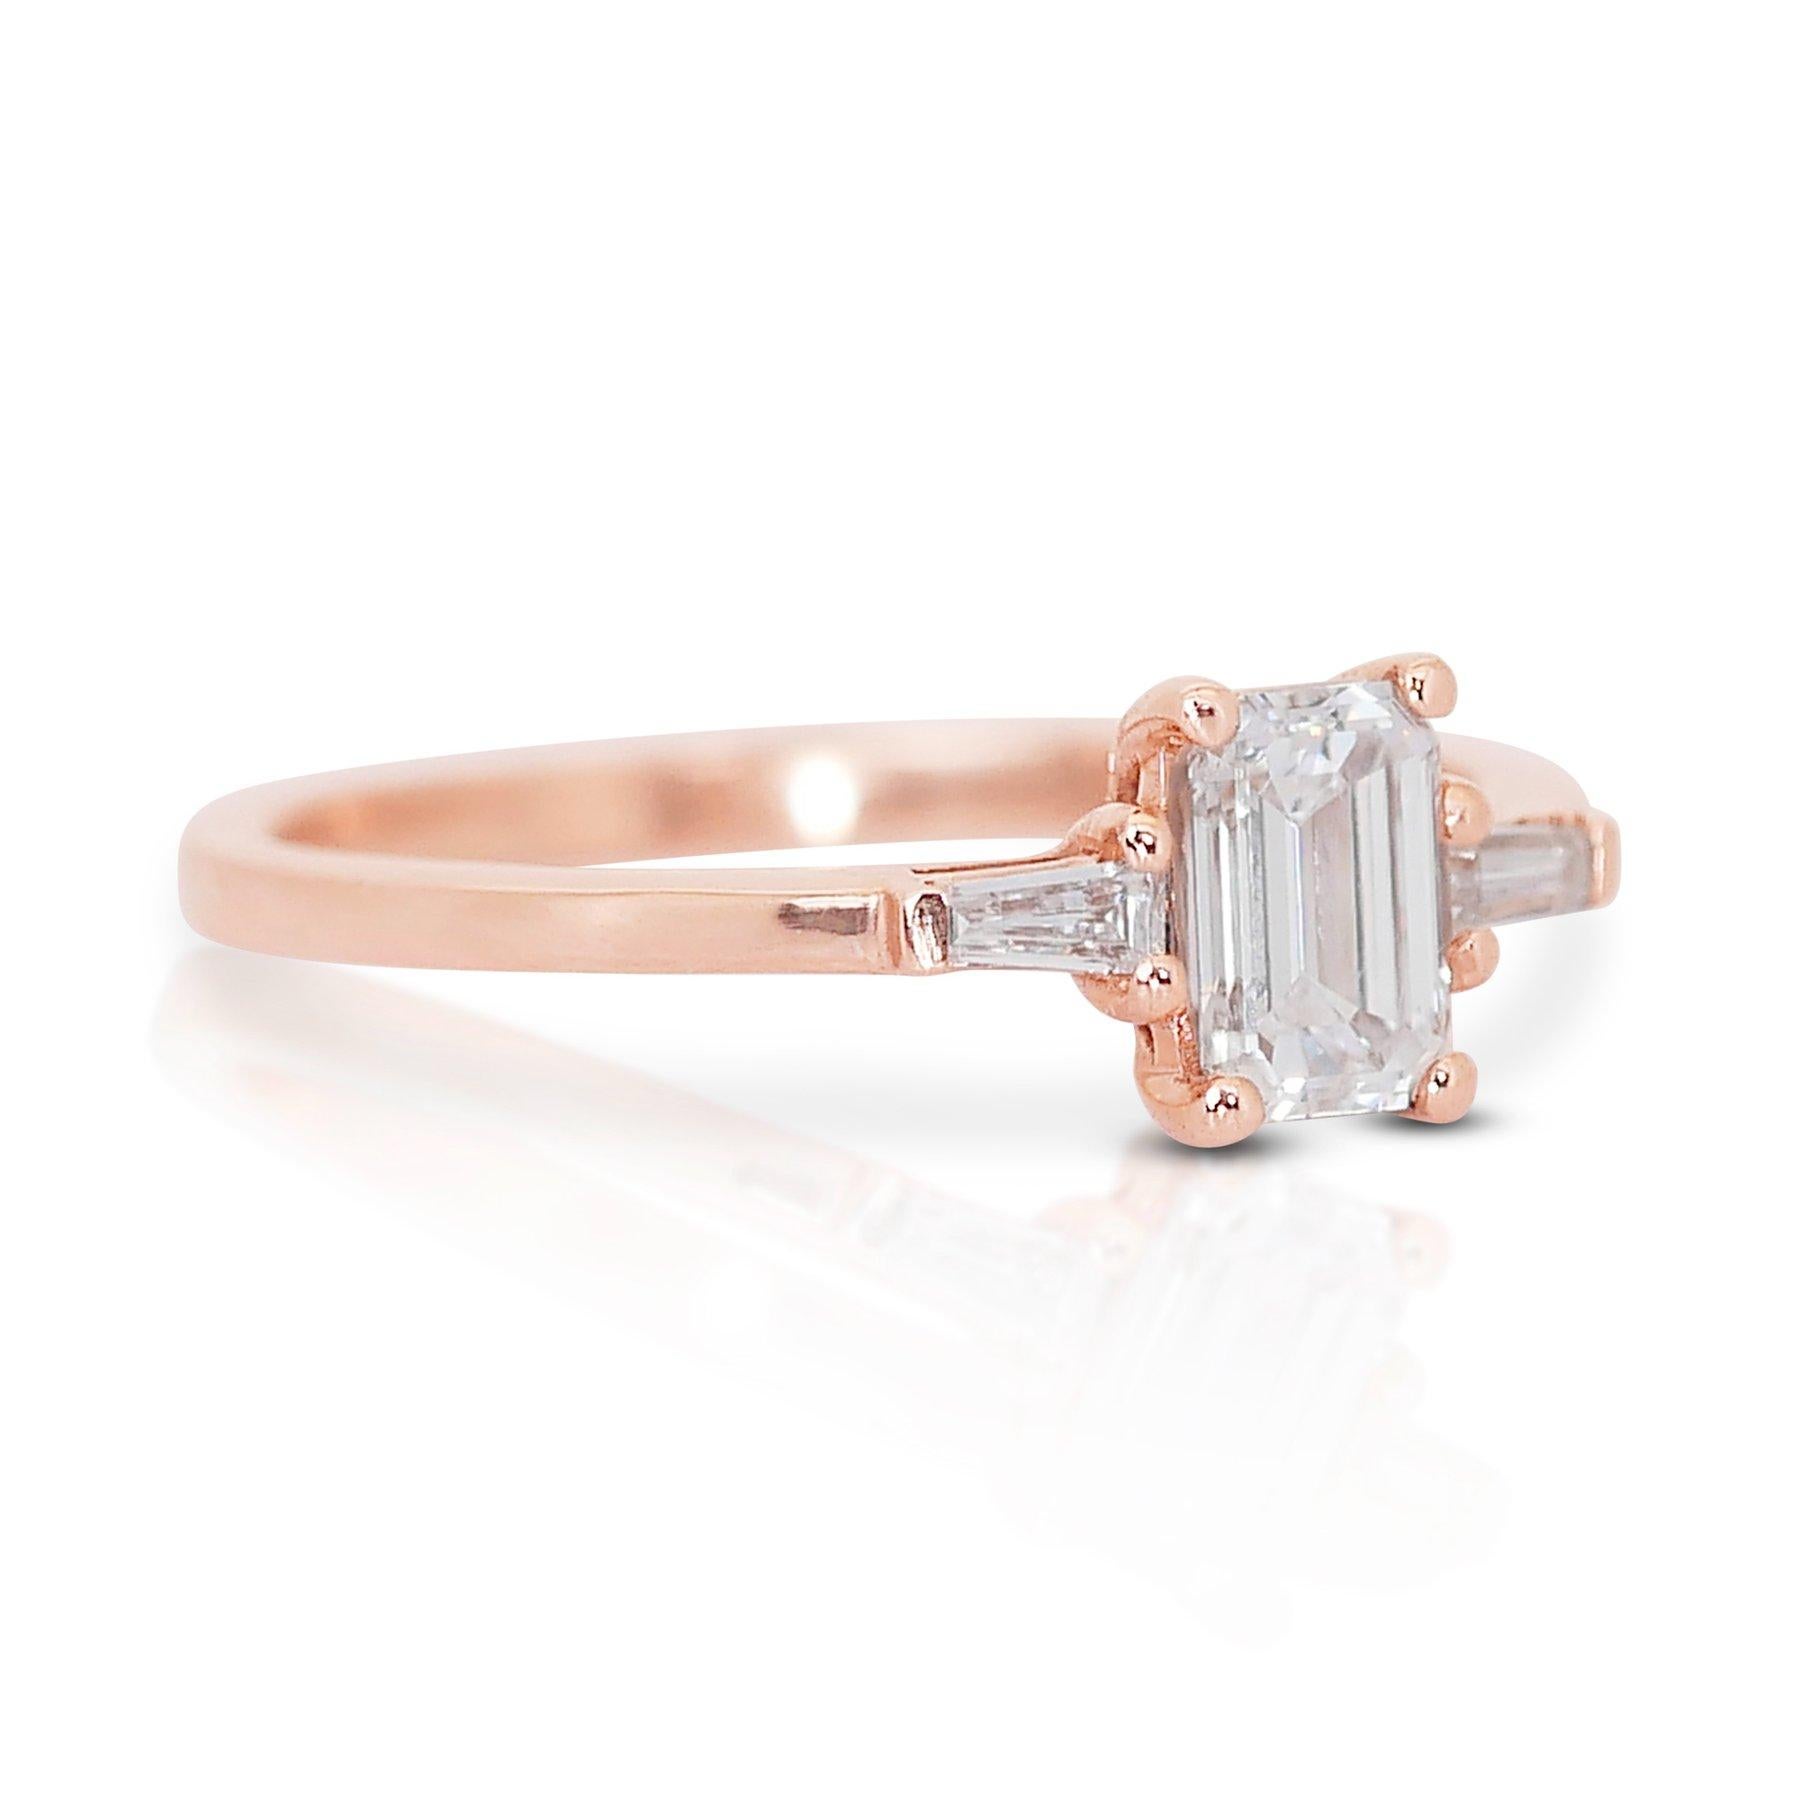 Elegant 0.90ct Emerald-Cut Diamond 3-Stone Ring in 18k Rose Gold - GIA Certified

Step into a world of refined elegance with this exquisite diamond 3-stone ring, meticulously crafted in 18k rose gold. At its heart lies a 0.70-carat emerald-cut